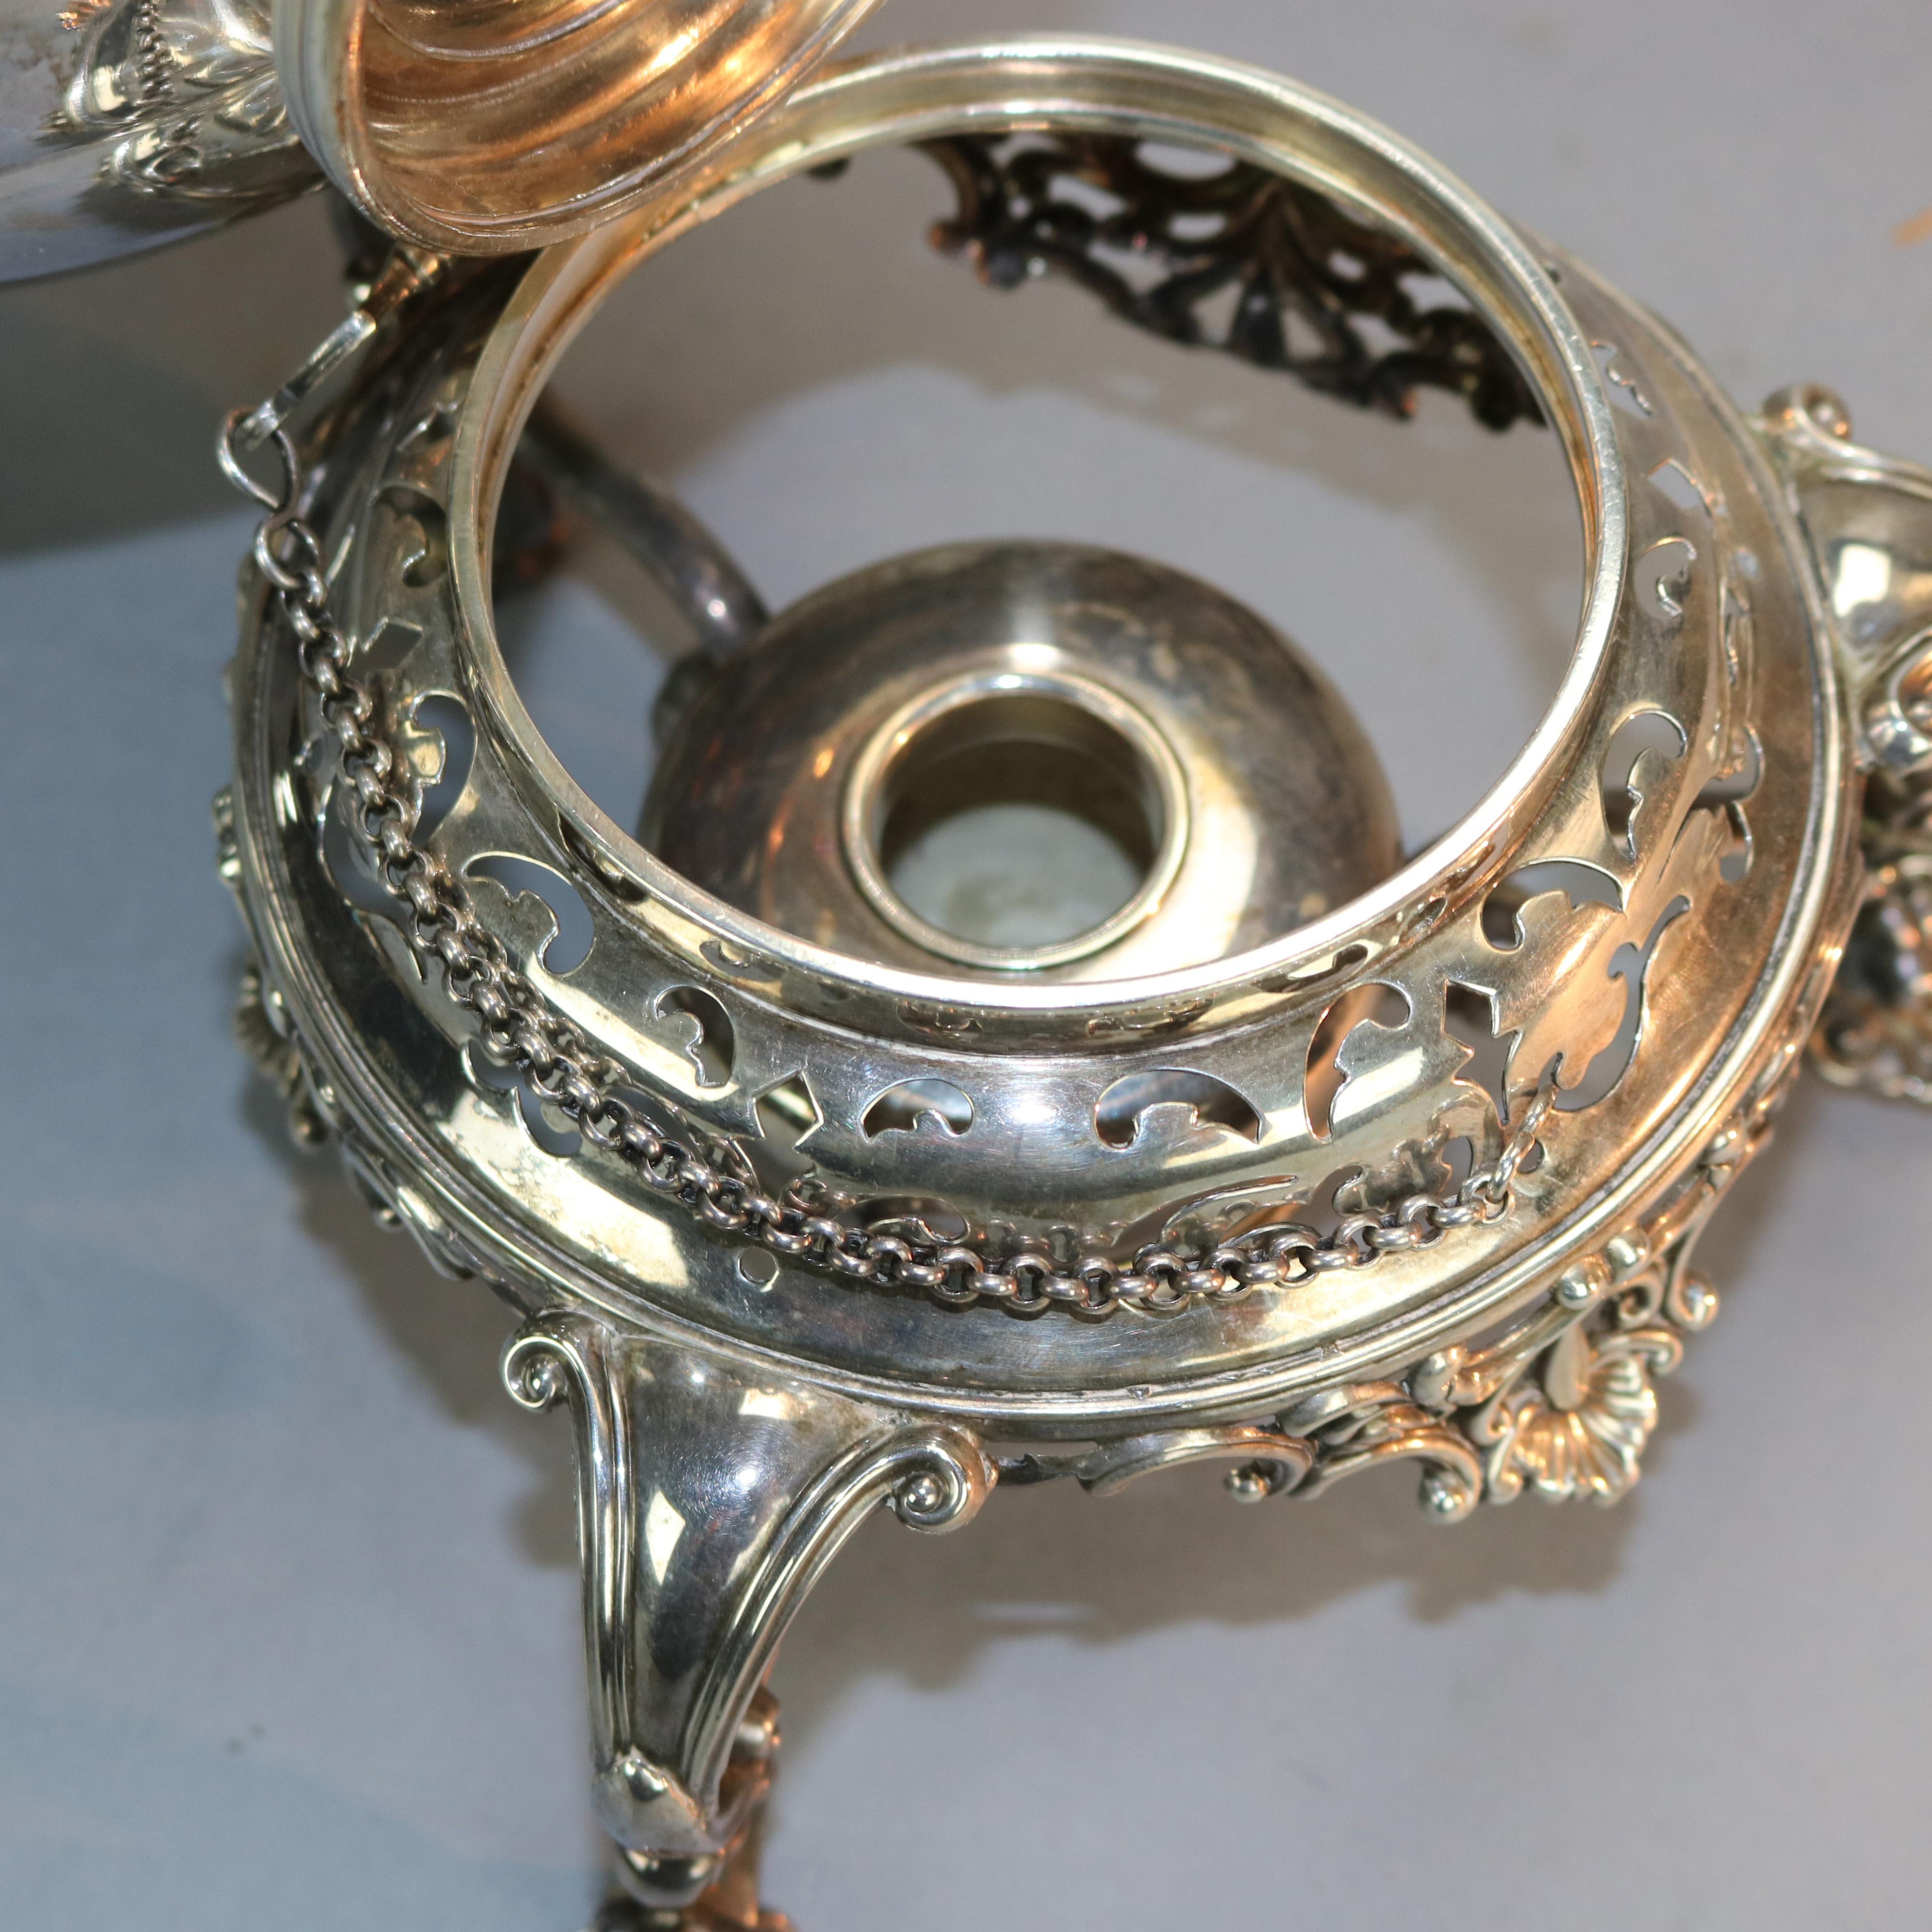 19th Century Antique George III Silver Plate Tilting Teapot with Burner Stand, Circa 1830